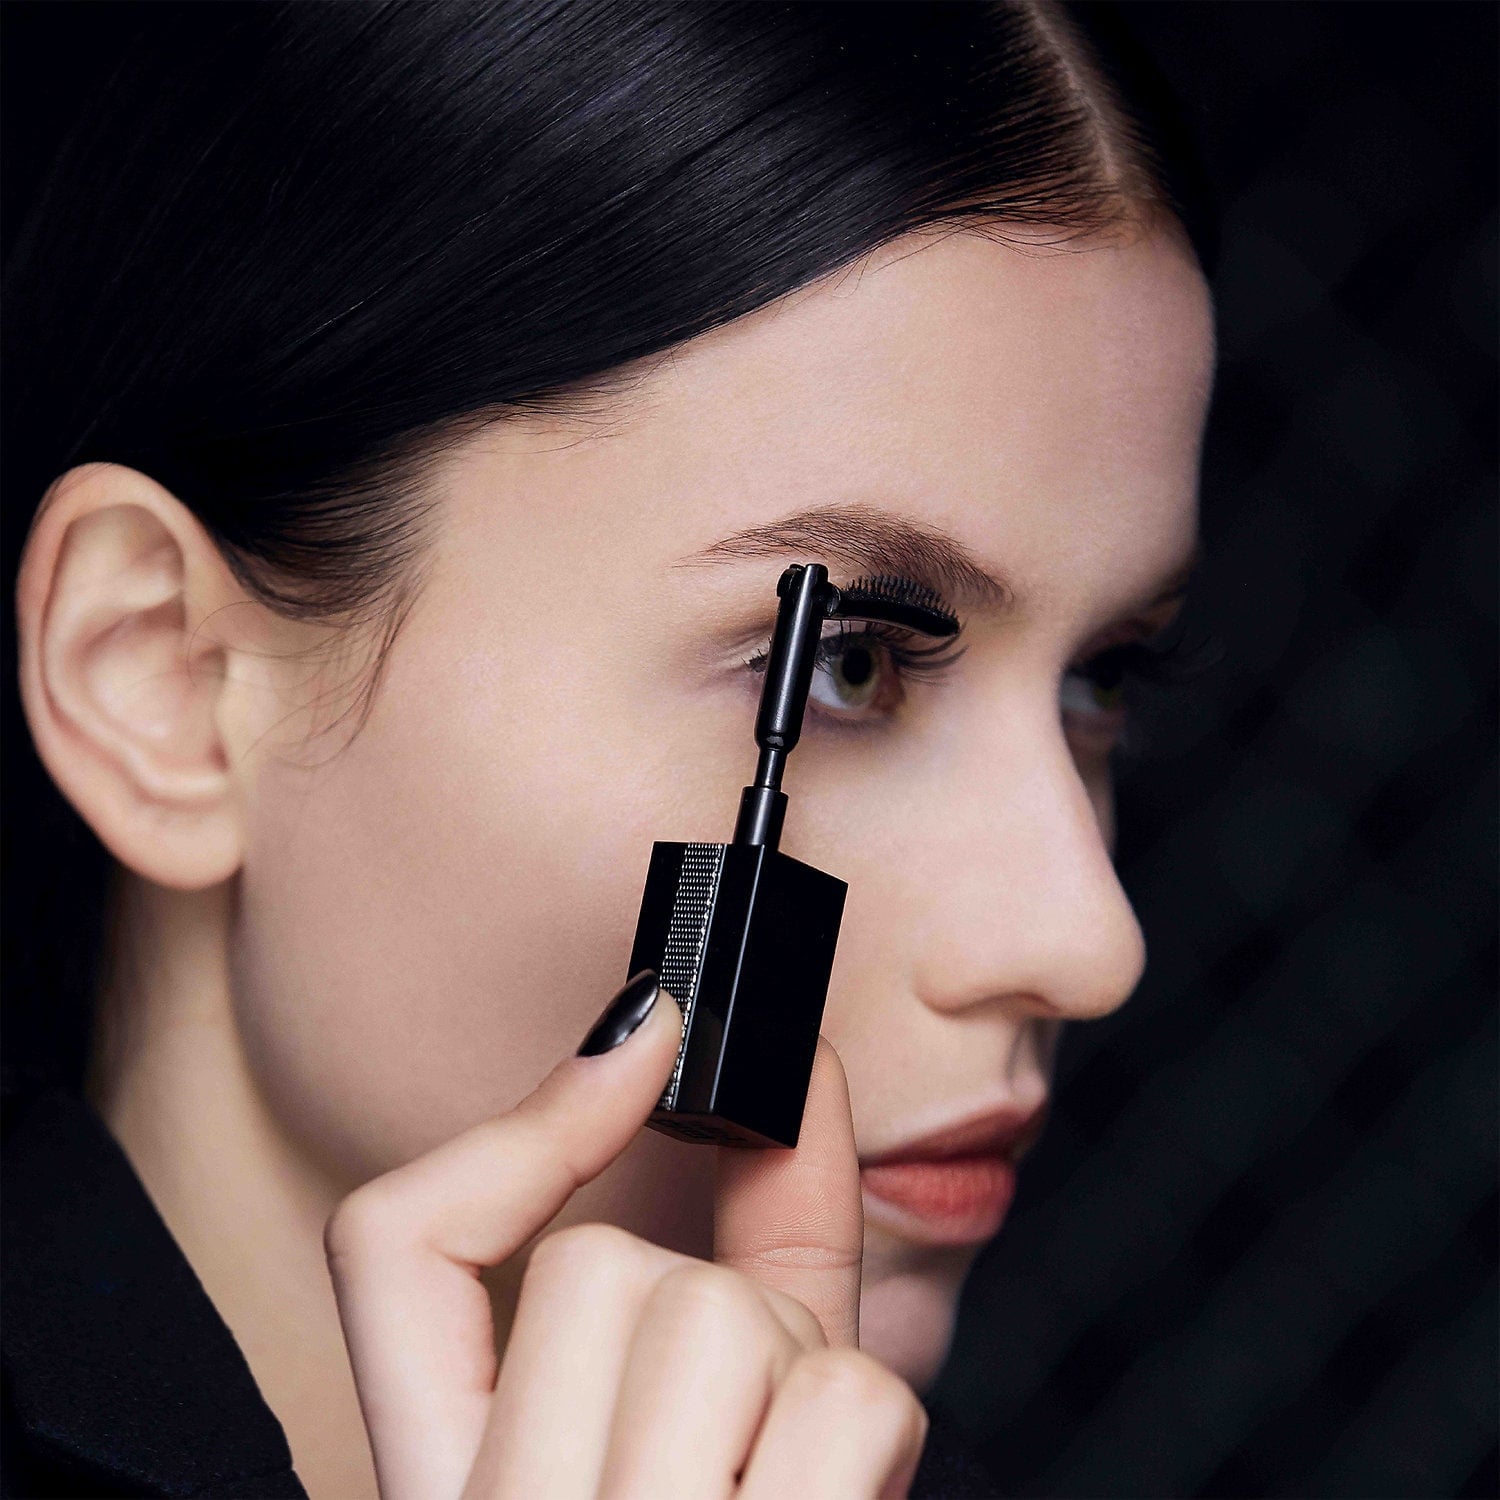 The Curler Lengthening and Curling Mascara - Yves Saint Laurent